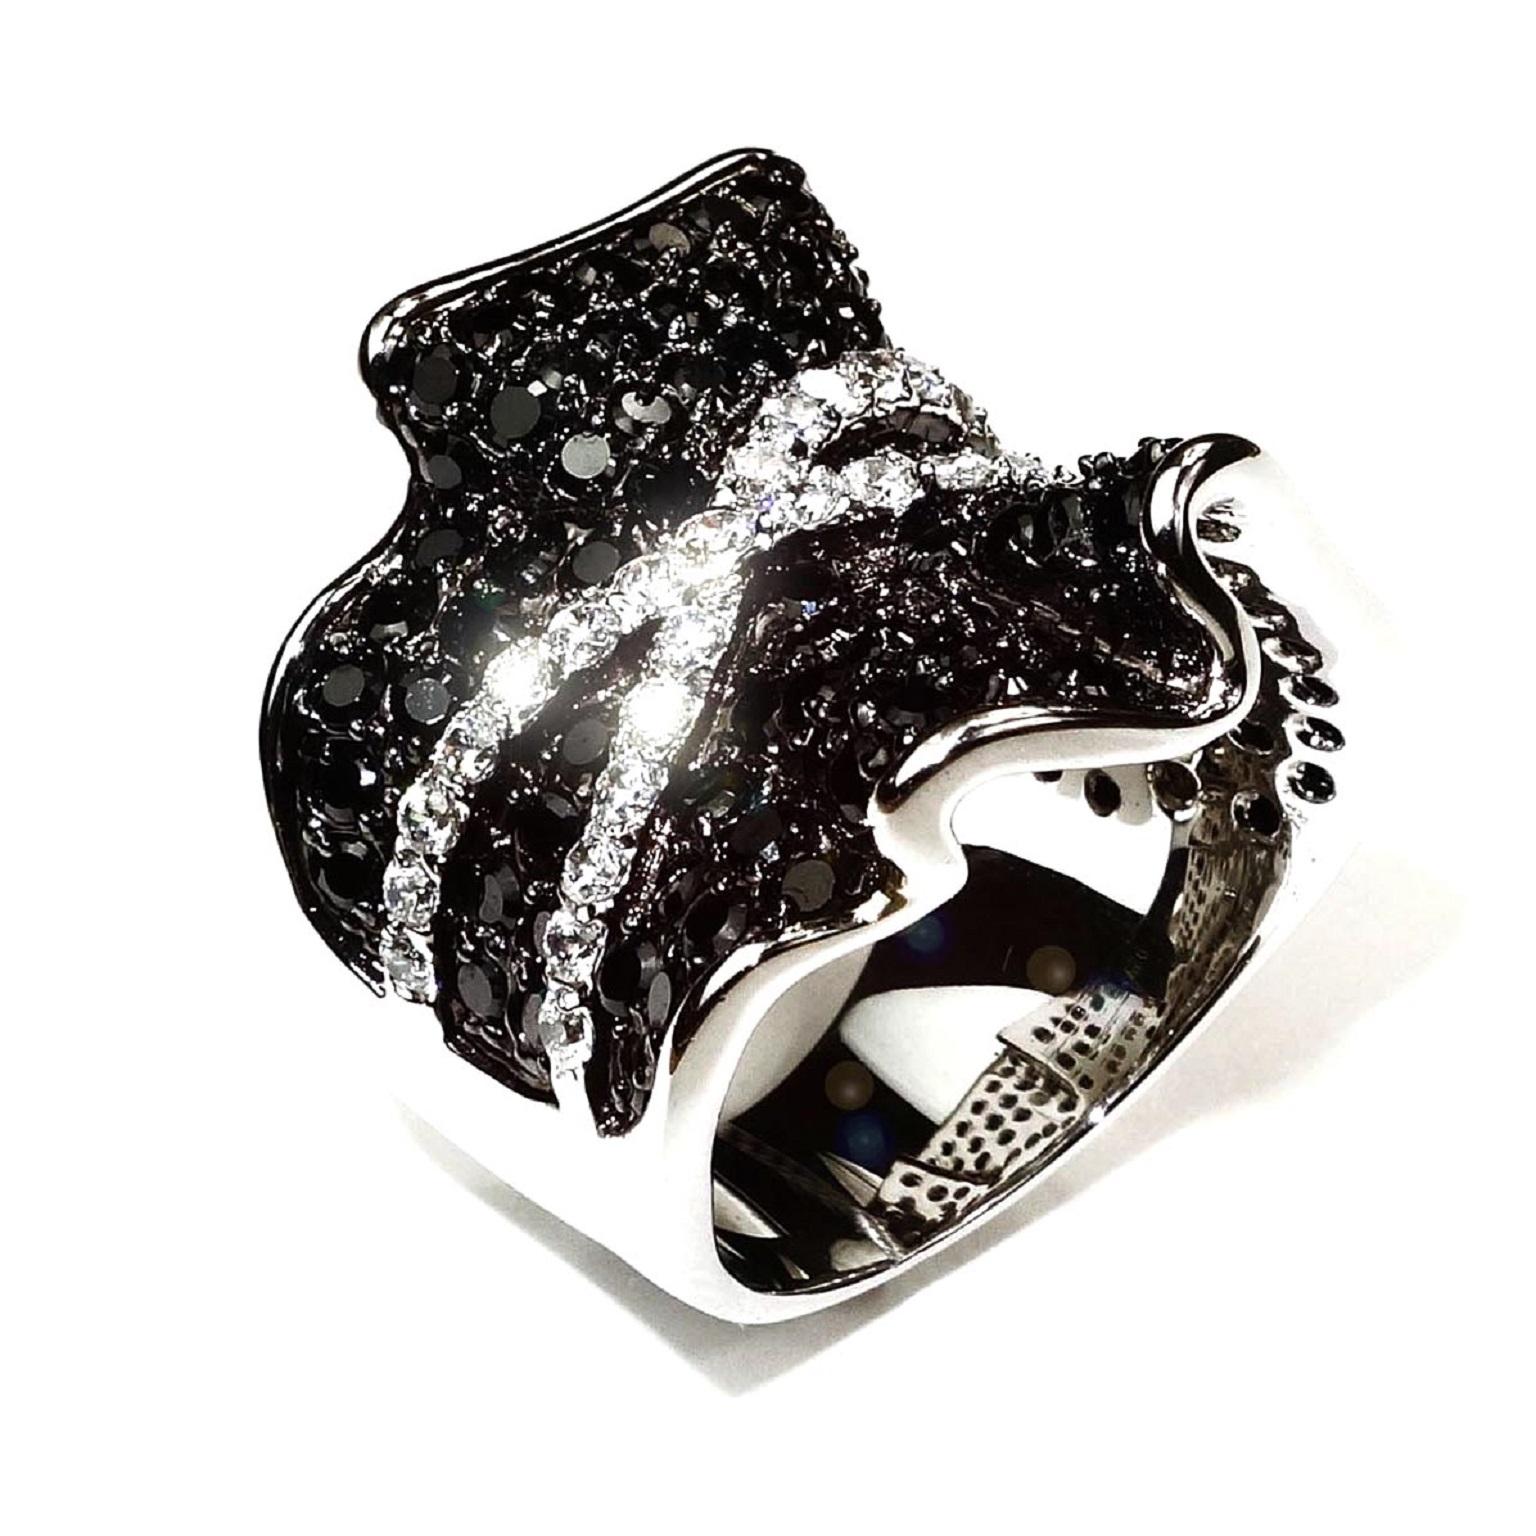 Fun, faux sparkly Black and White Dinner ring.  Sparkly Black and White CZs set in Rhodium plated Sterling Silver.  The ruffly shape is elegant and the cris-cross design is a winner.  The ring fits very comfortably and is a nice weight.  it is just